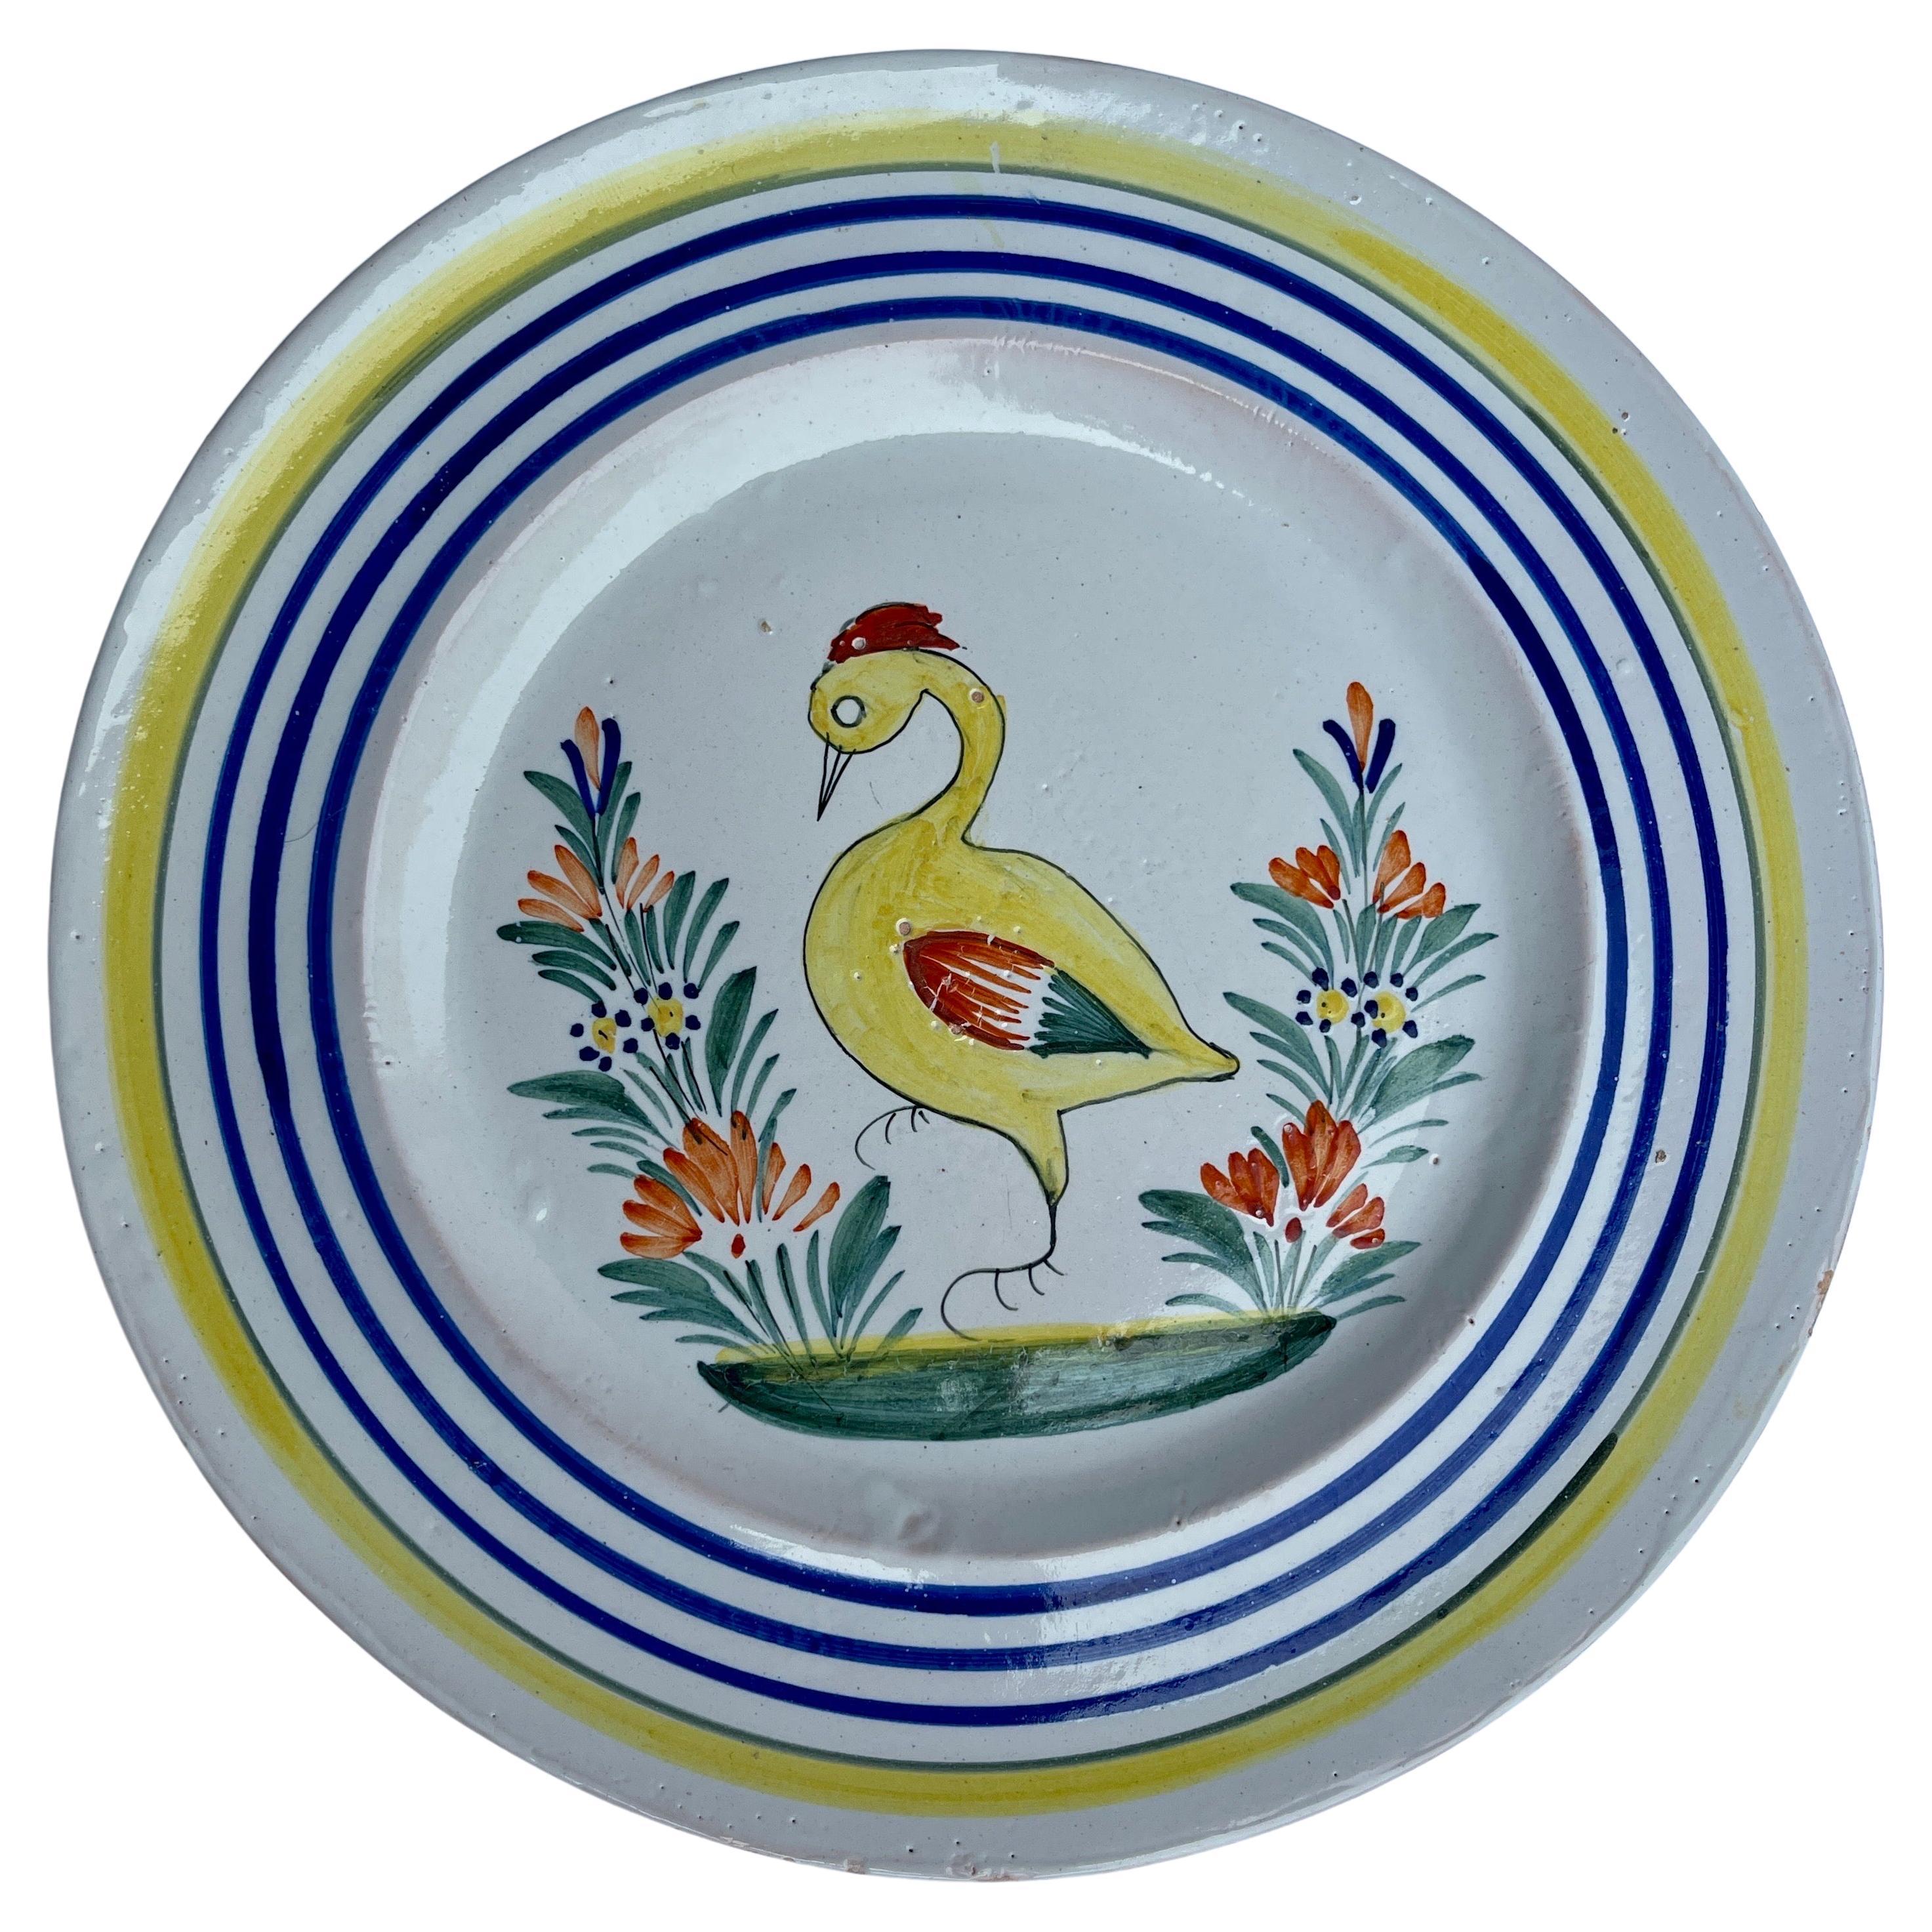 hand painted French Faience 1930s Quimper Duck Plate

Exceptional Quimper plate from France featuring a duck in the center. The rim of the piece is accentuated with a colorful border with yellow and blue lines. This rare and unusual illustration